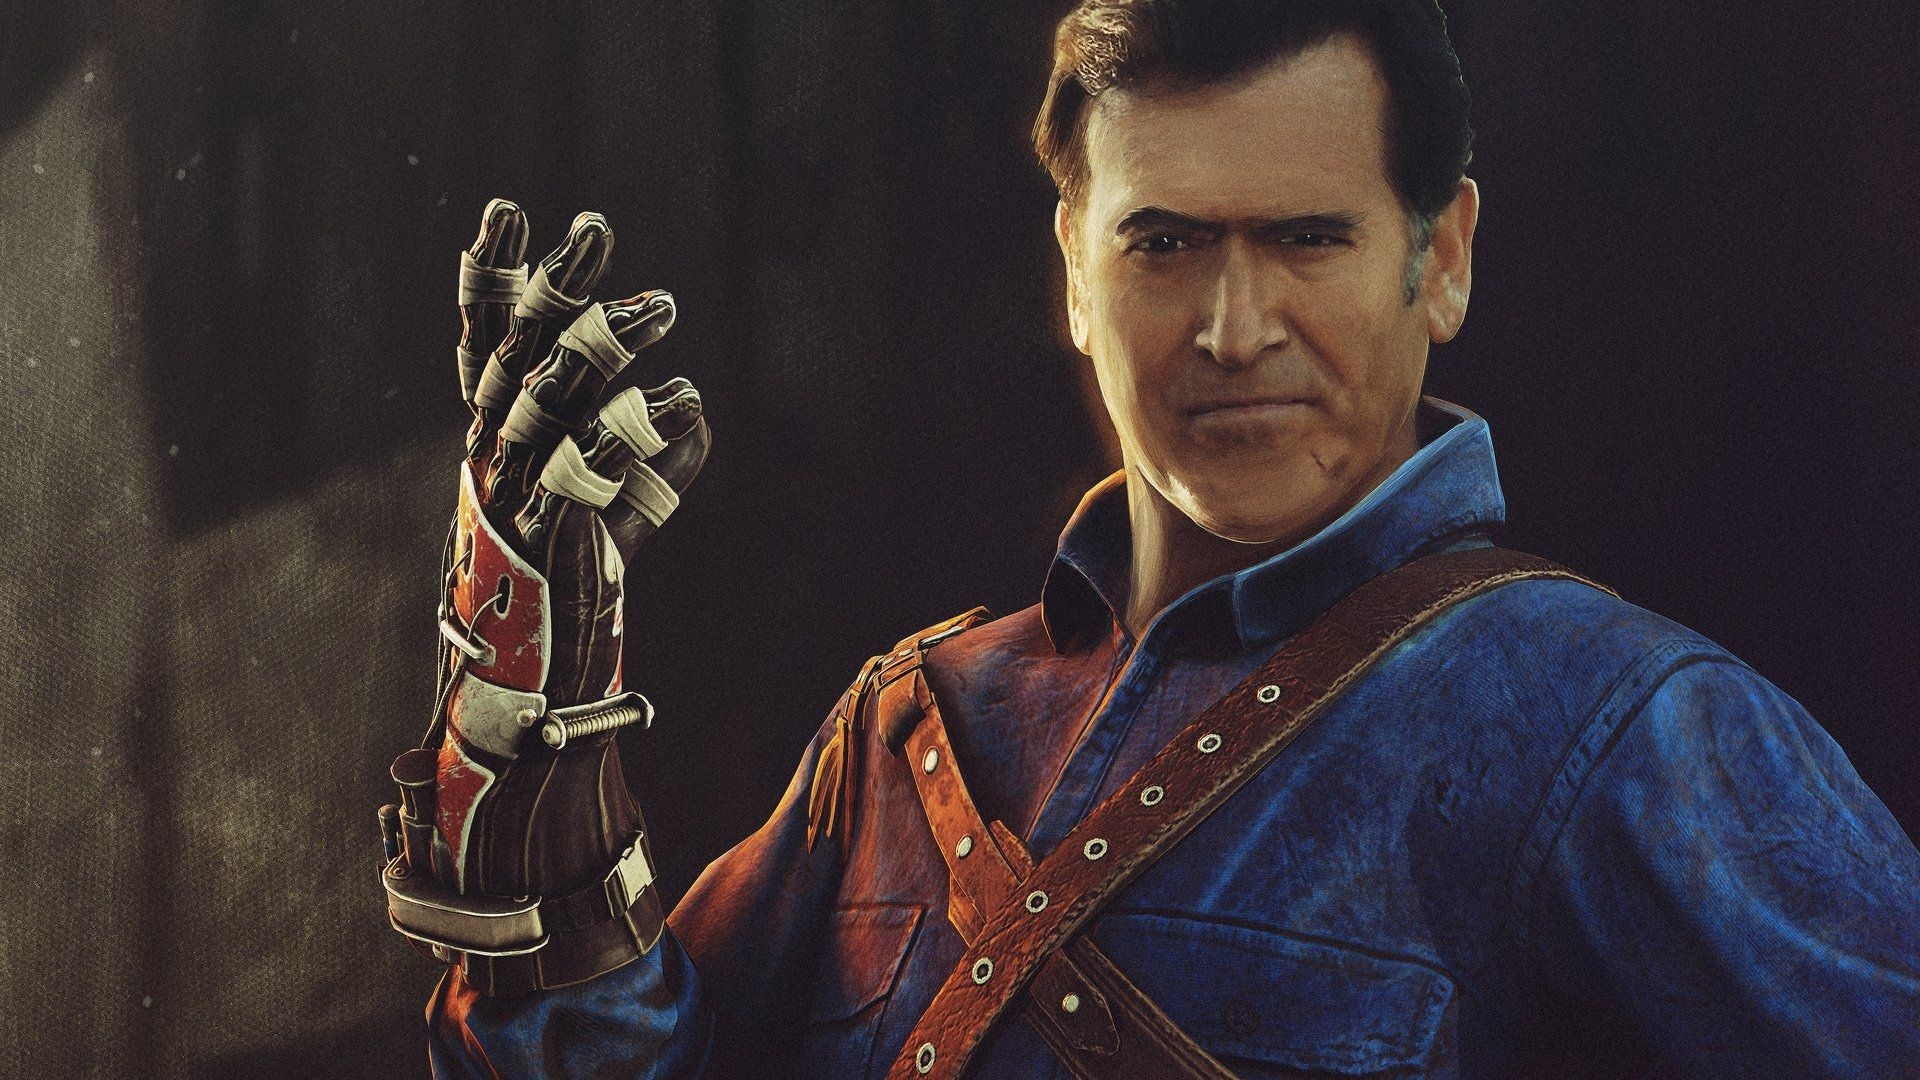 Bruce Campbell: Ash Williams armed with Pablo's customized Power Glove, Evil Dead. 1920x1080 Full HD Wallpaper.